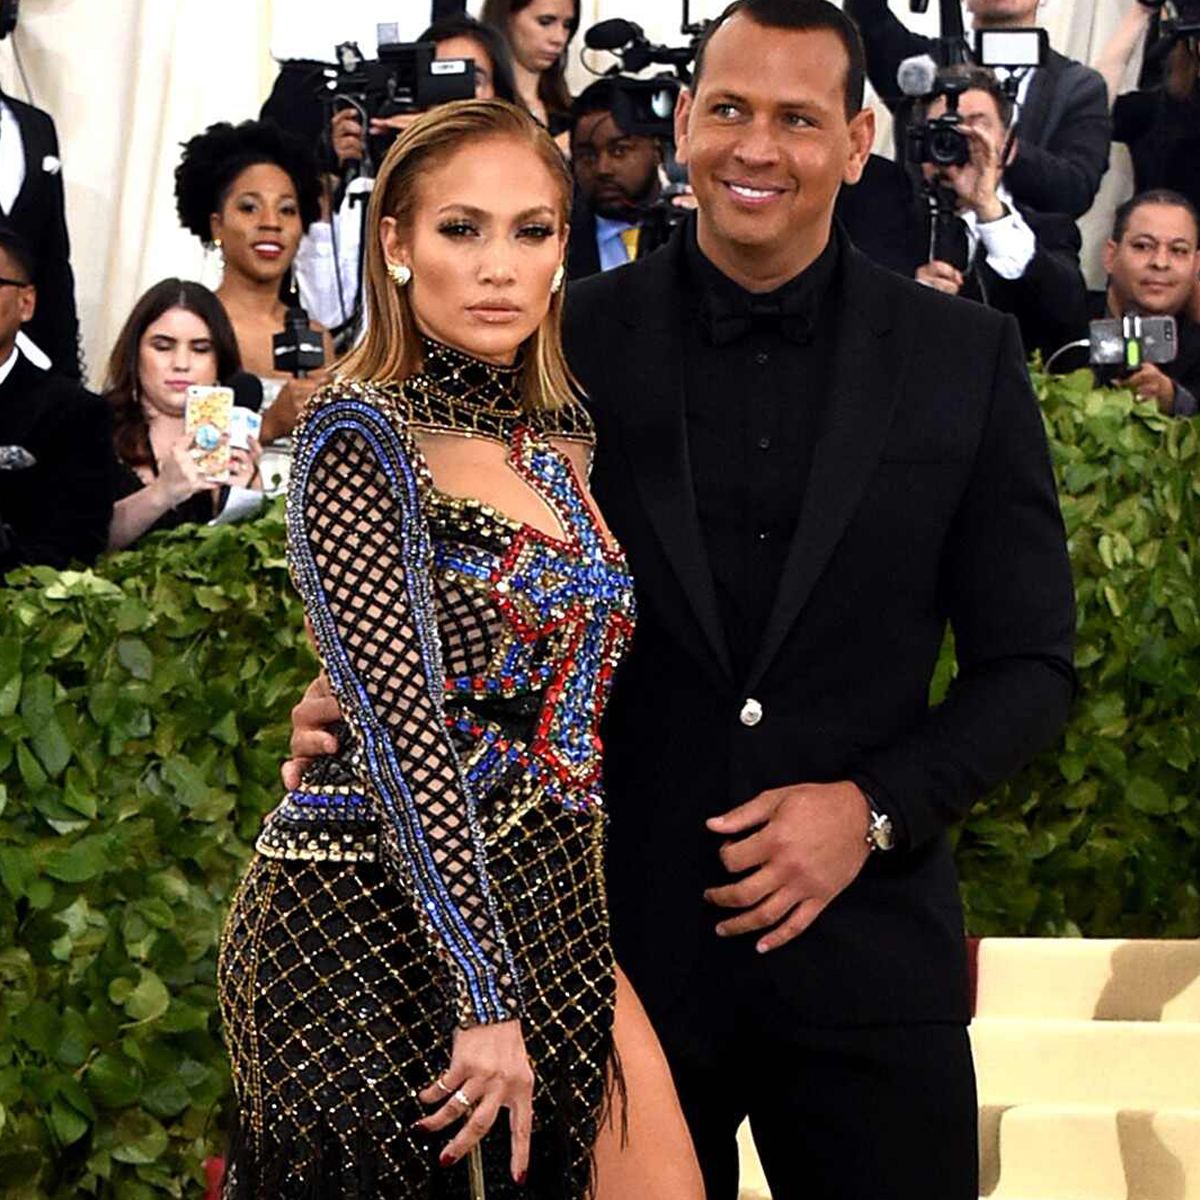 Jennifer Lopez and Alex Rodriguez are still together - Los Angeles Times